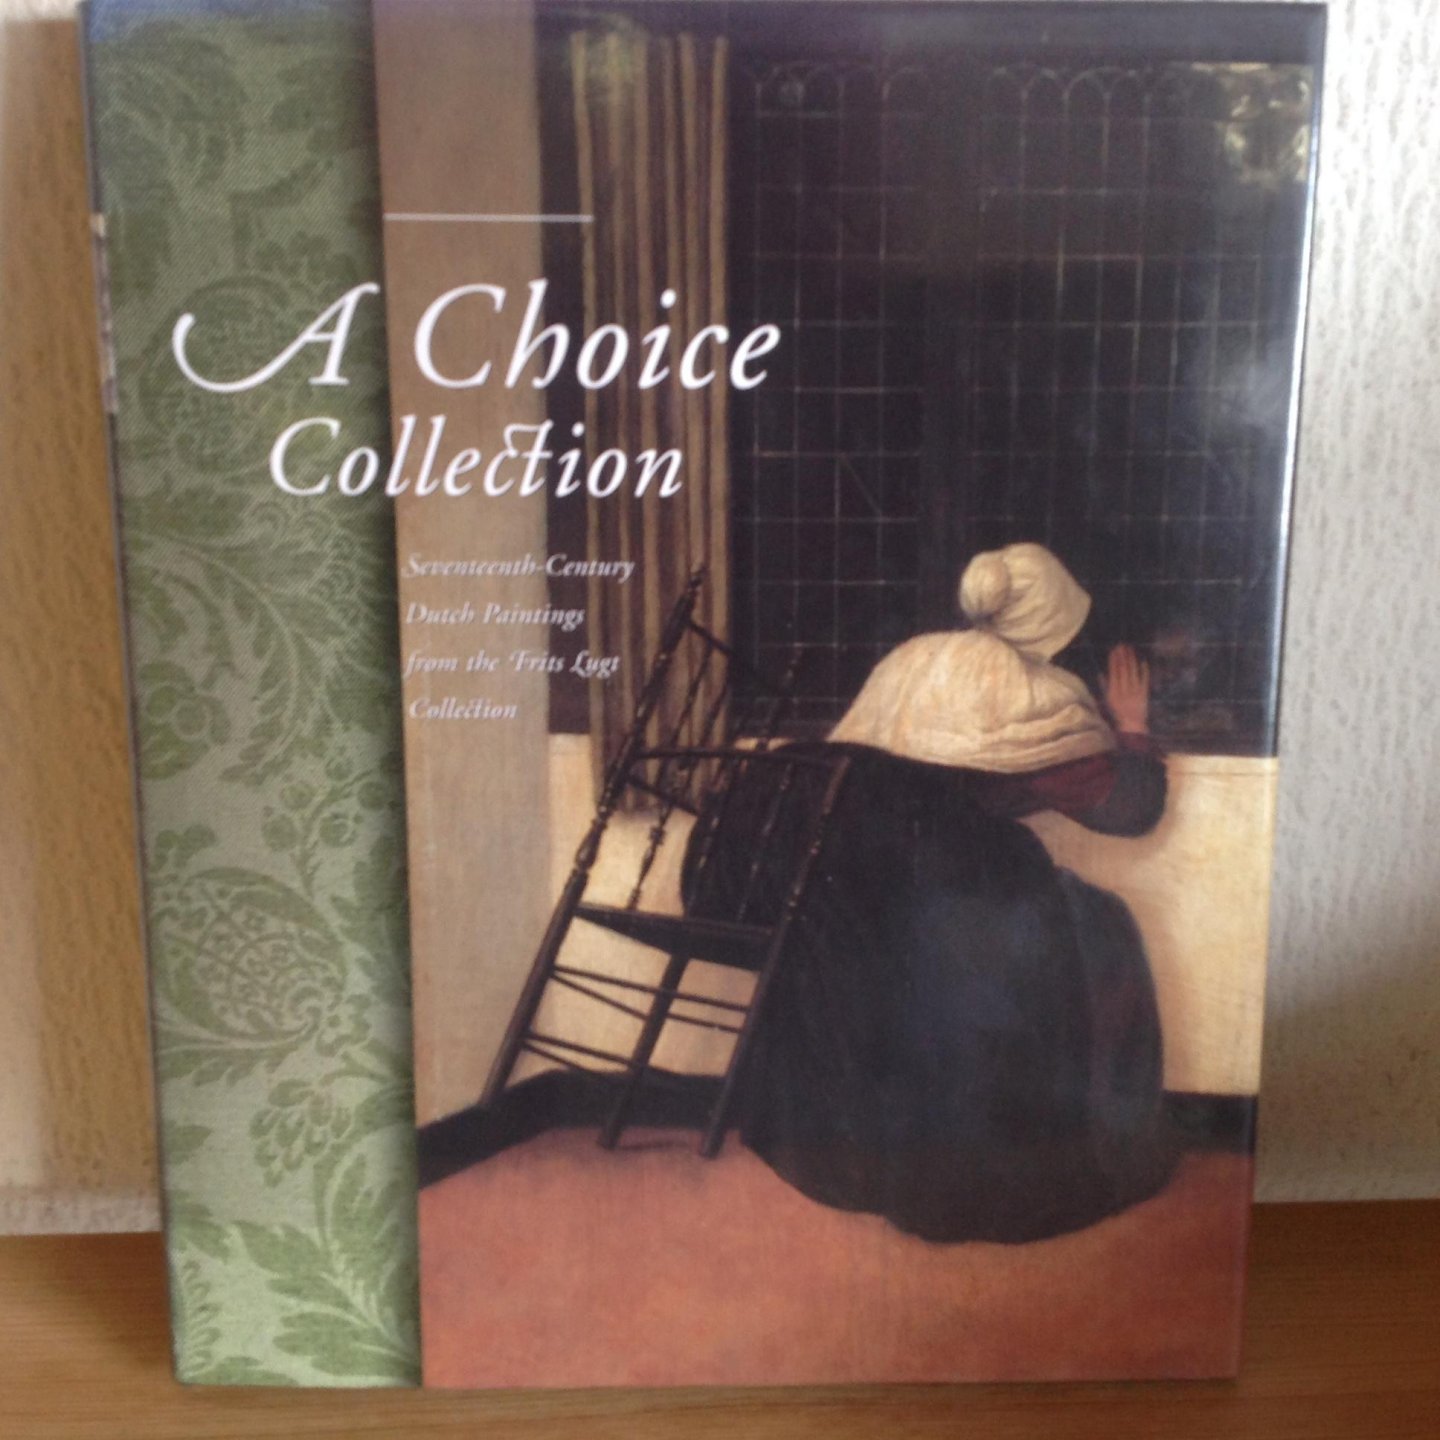 Buvelot, Q., Buijs, H., Reitsma, E. - A Choice Collection Frits Lugt / seventeenth century Dutch paintings form the Frits Lugt Collection